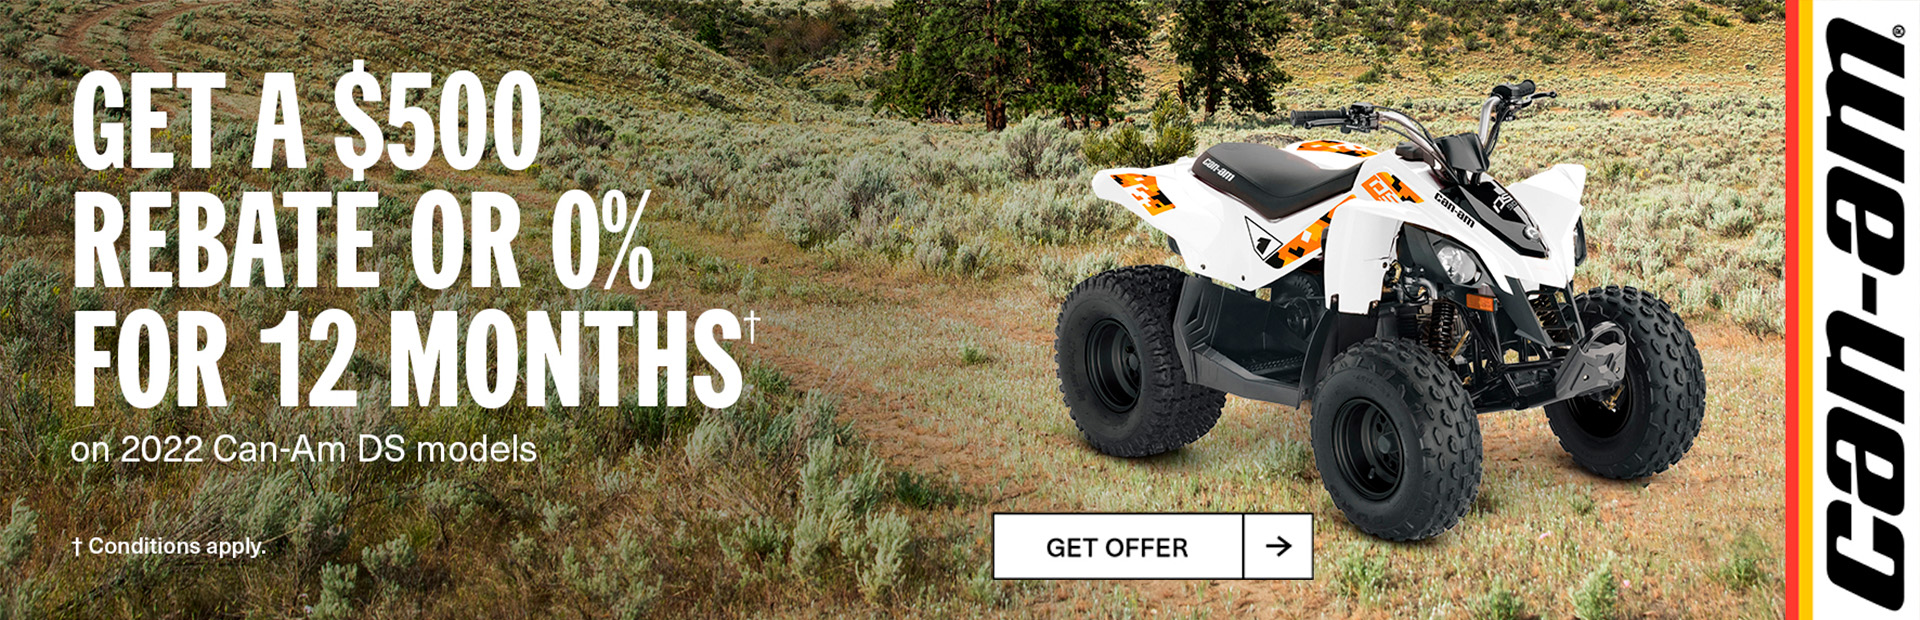 Can am Off Road - Retail Promotion at Shreveport Cycles